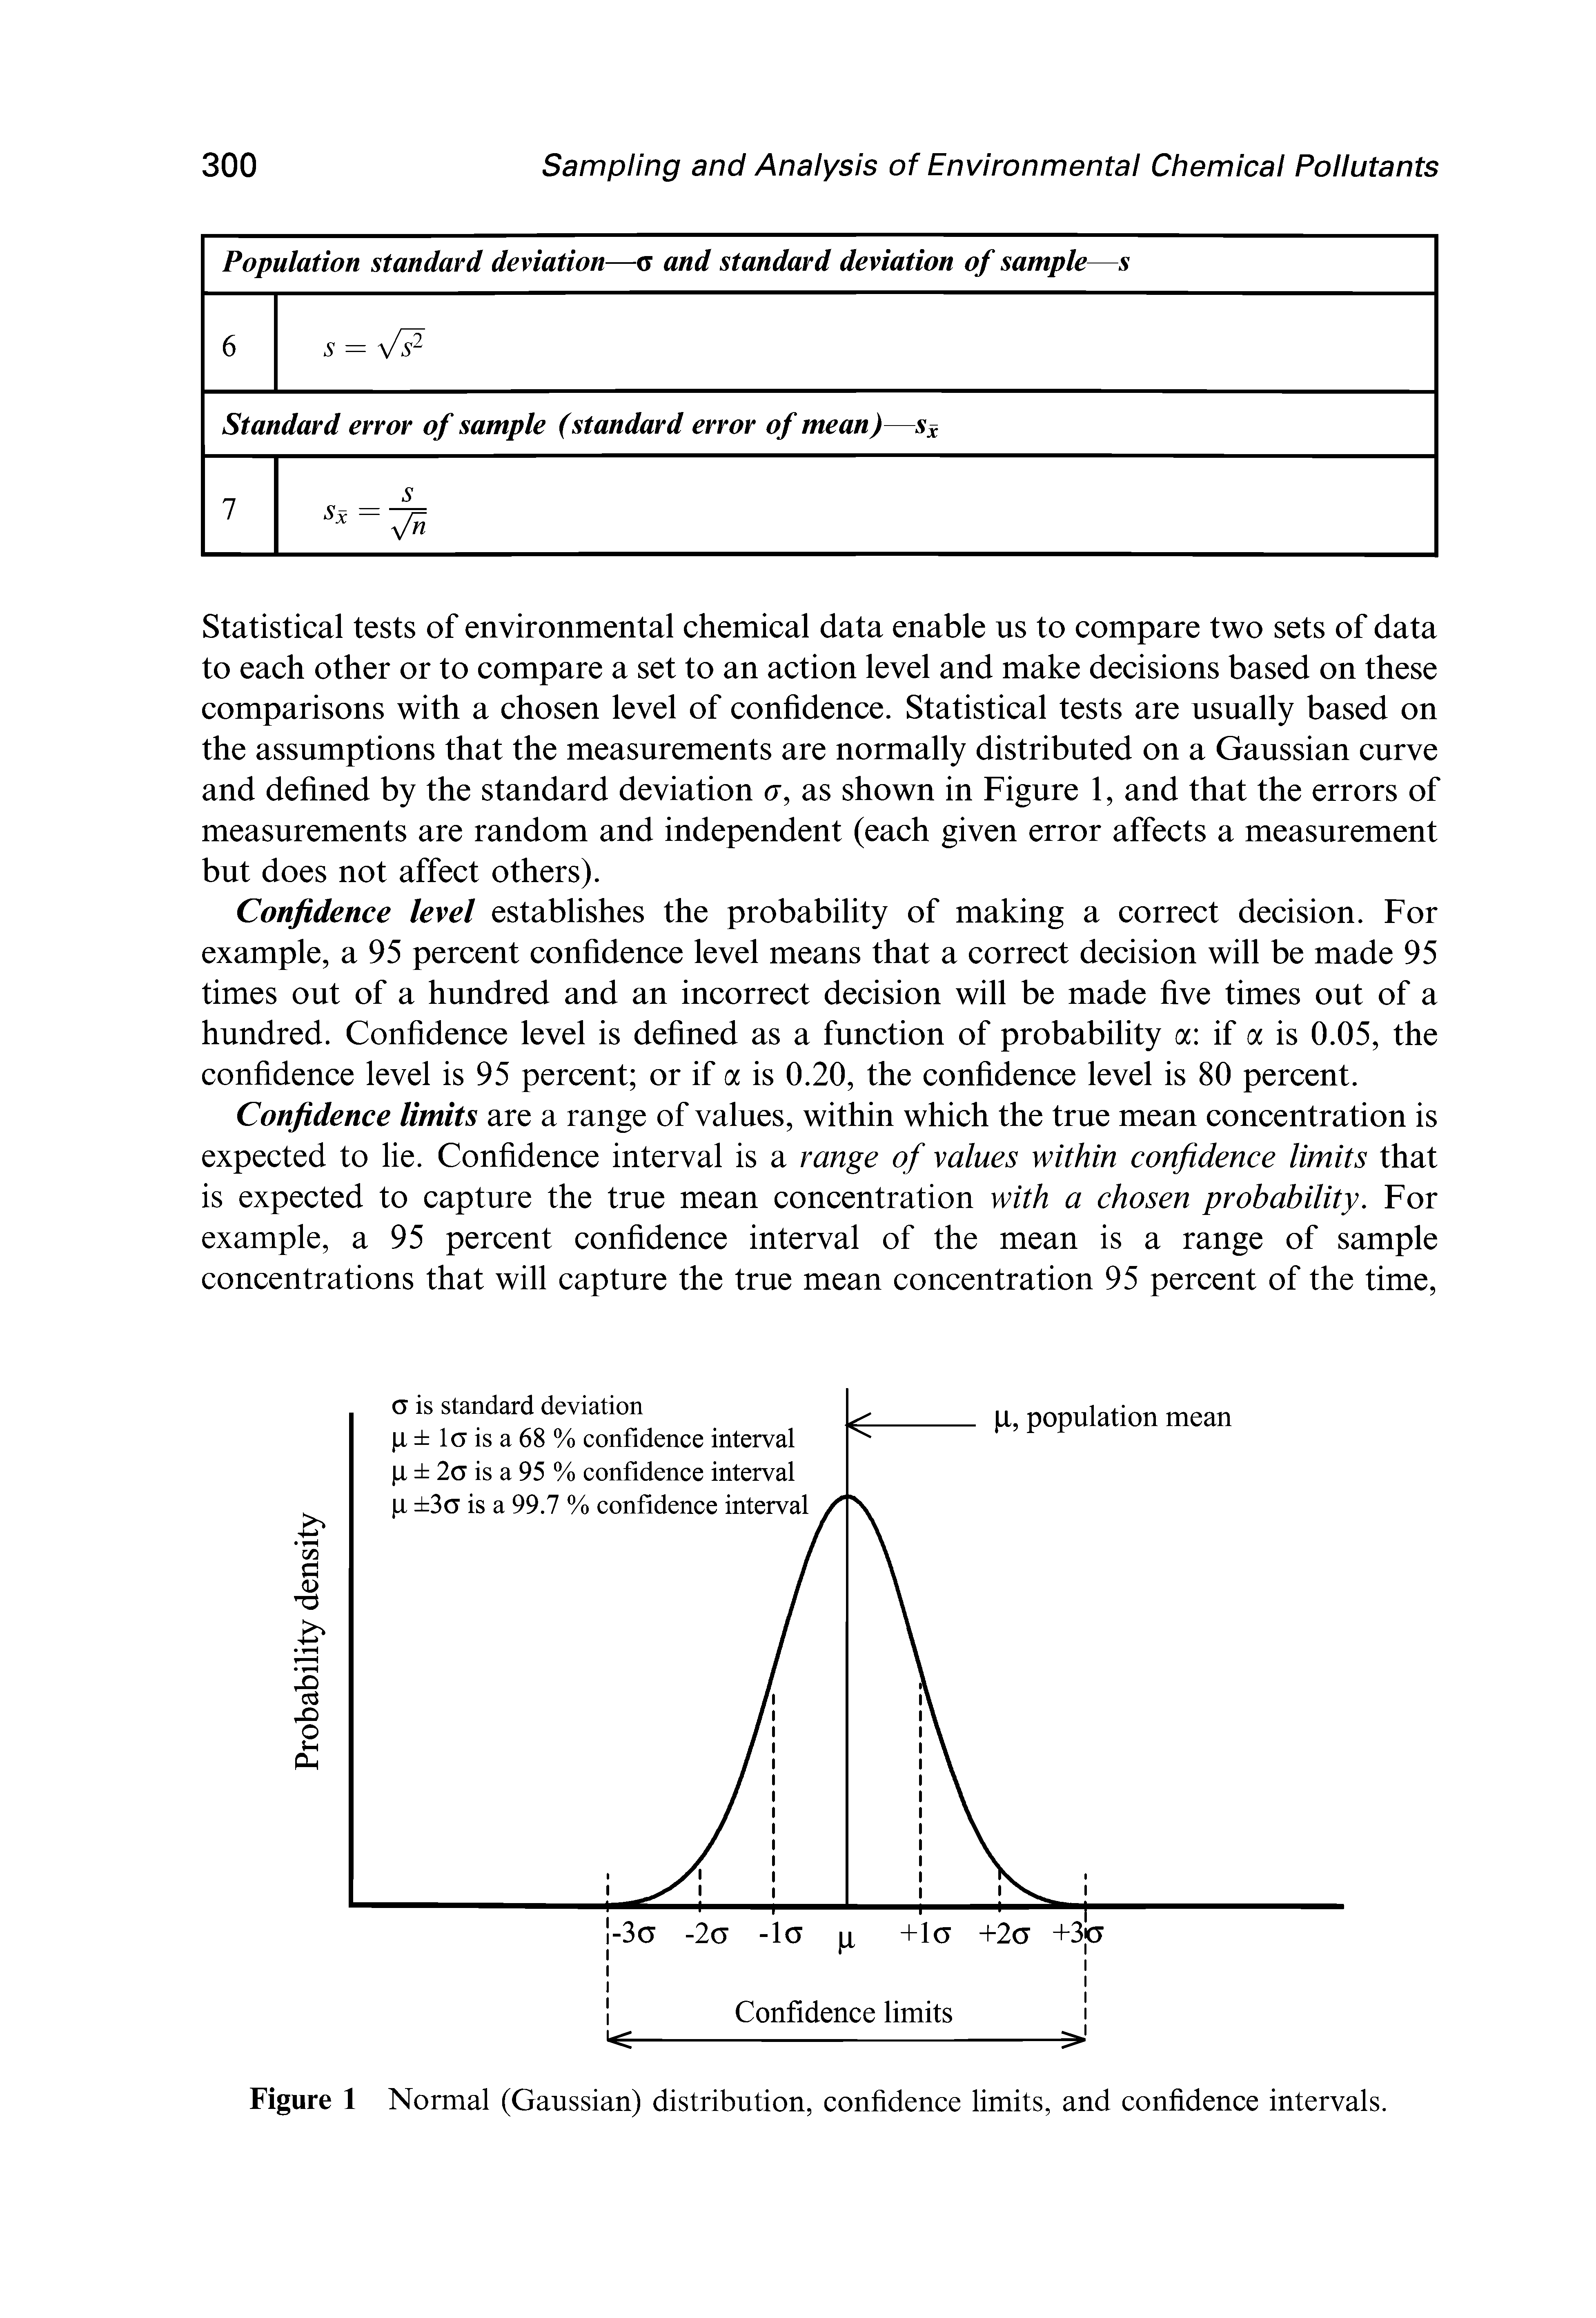 Figure 1 Normal (Gaussian) distribution, confidence limits, and confidence intervals.